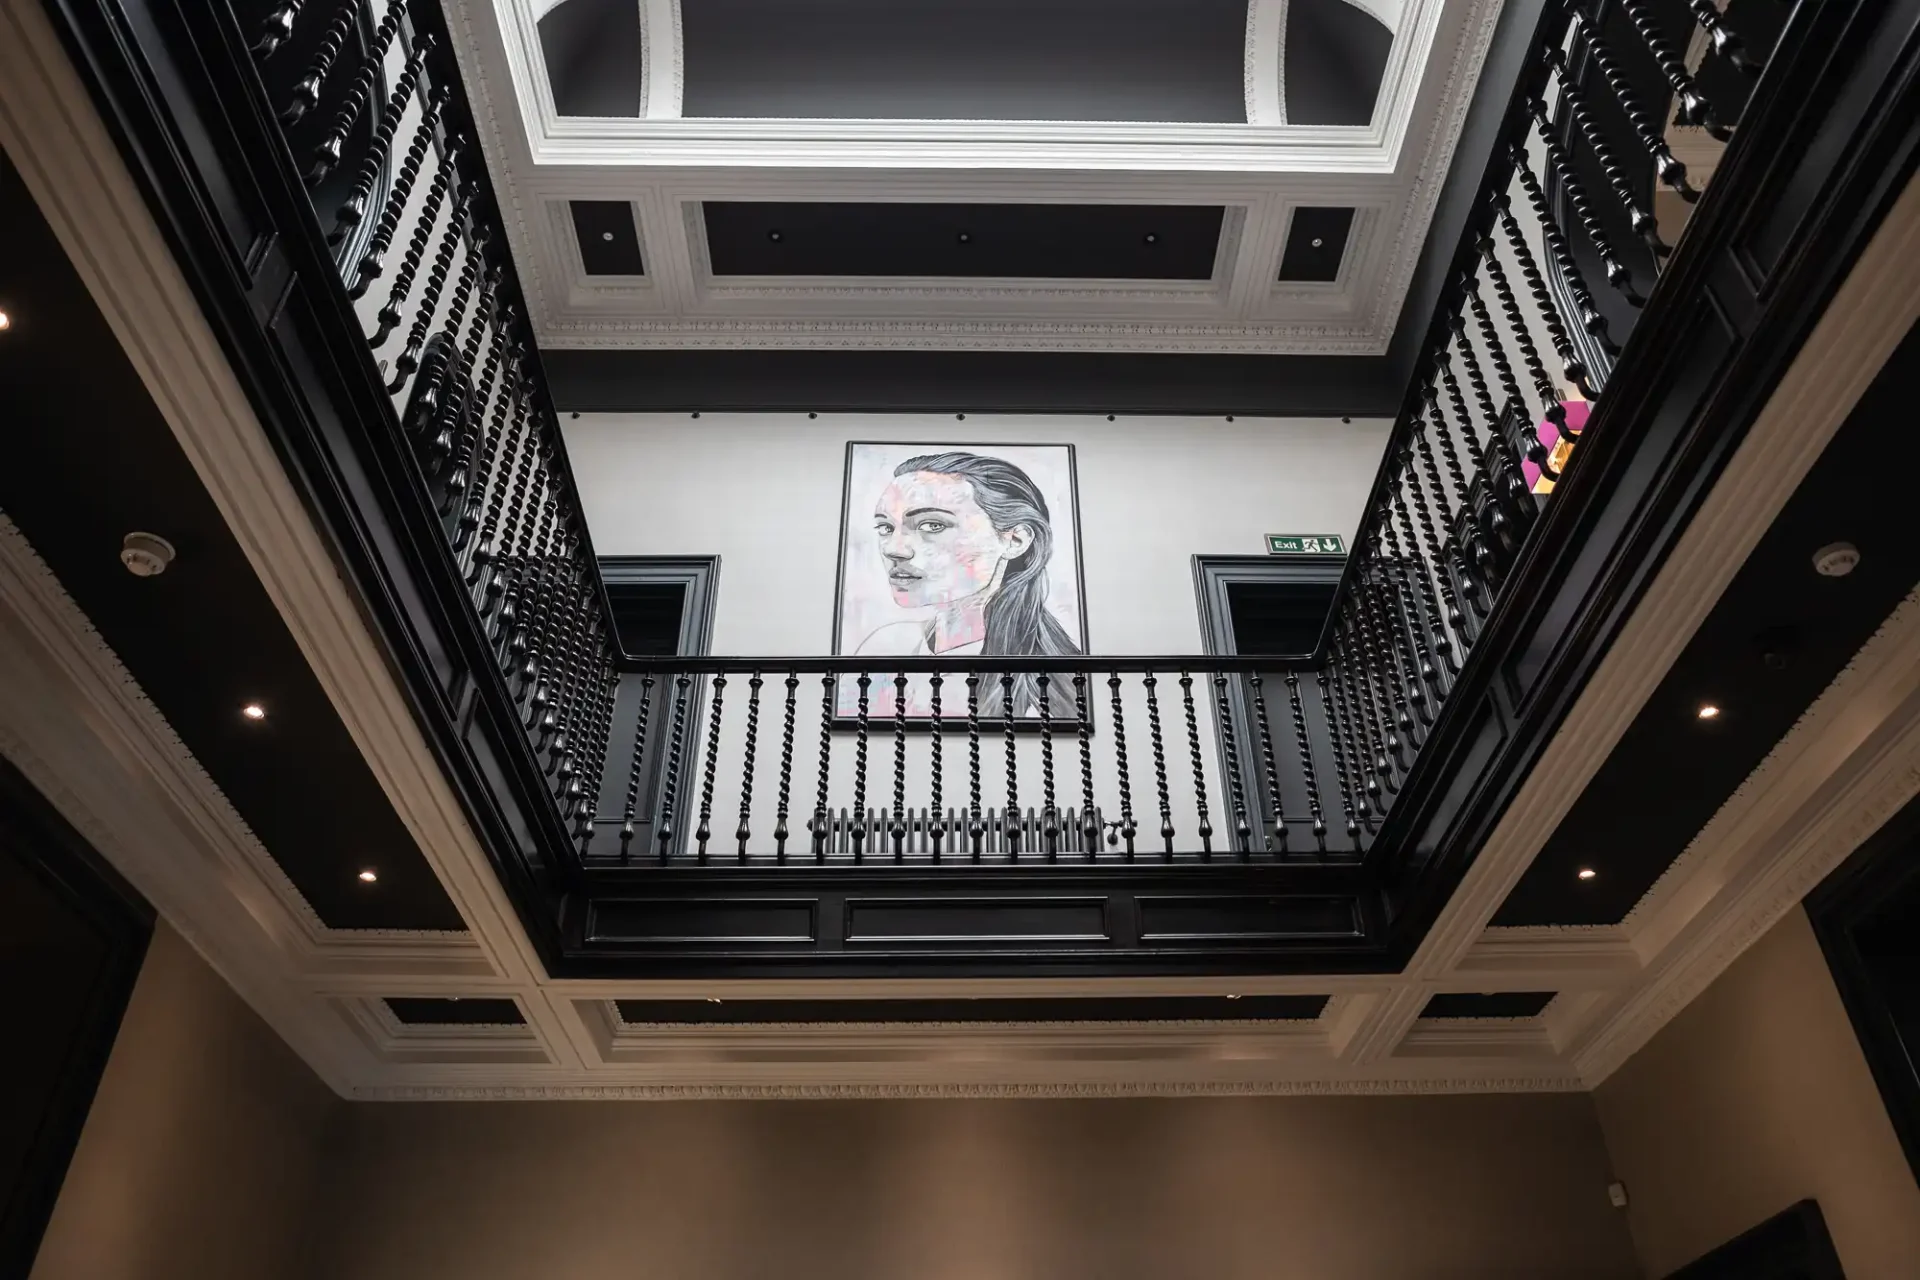 Interior of a multi-level atrium with black railings, white walls, and a large portrait hanging on the far wall above.